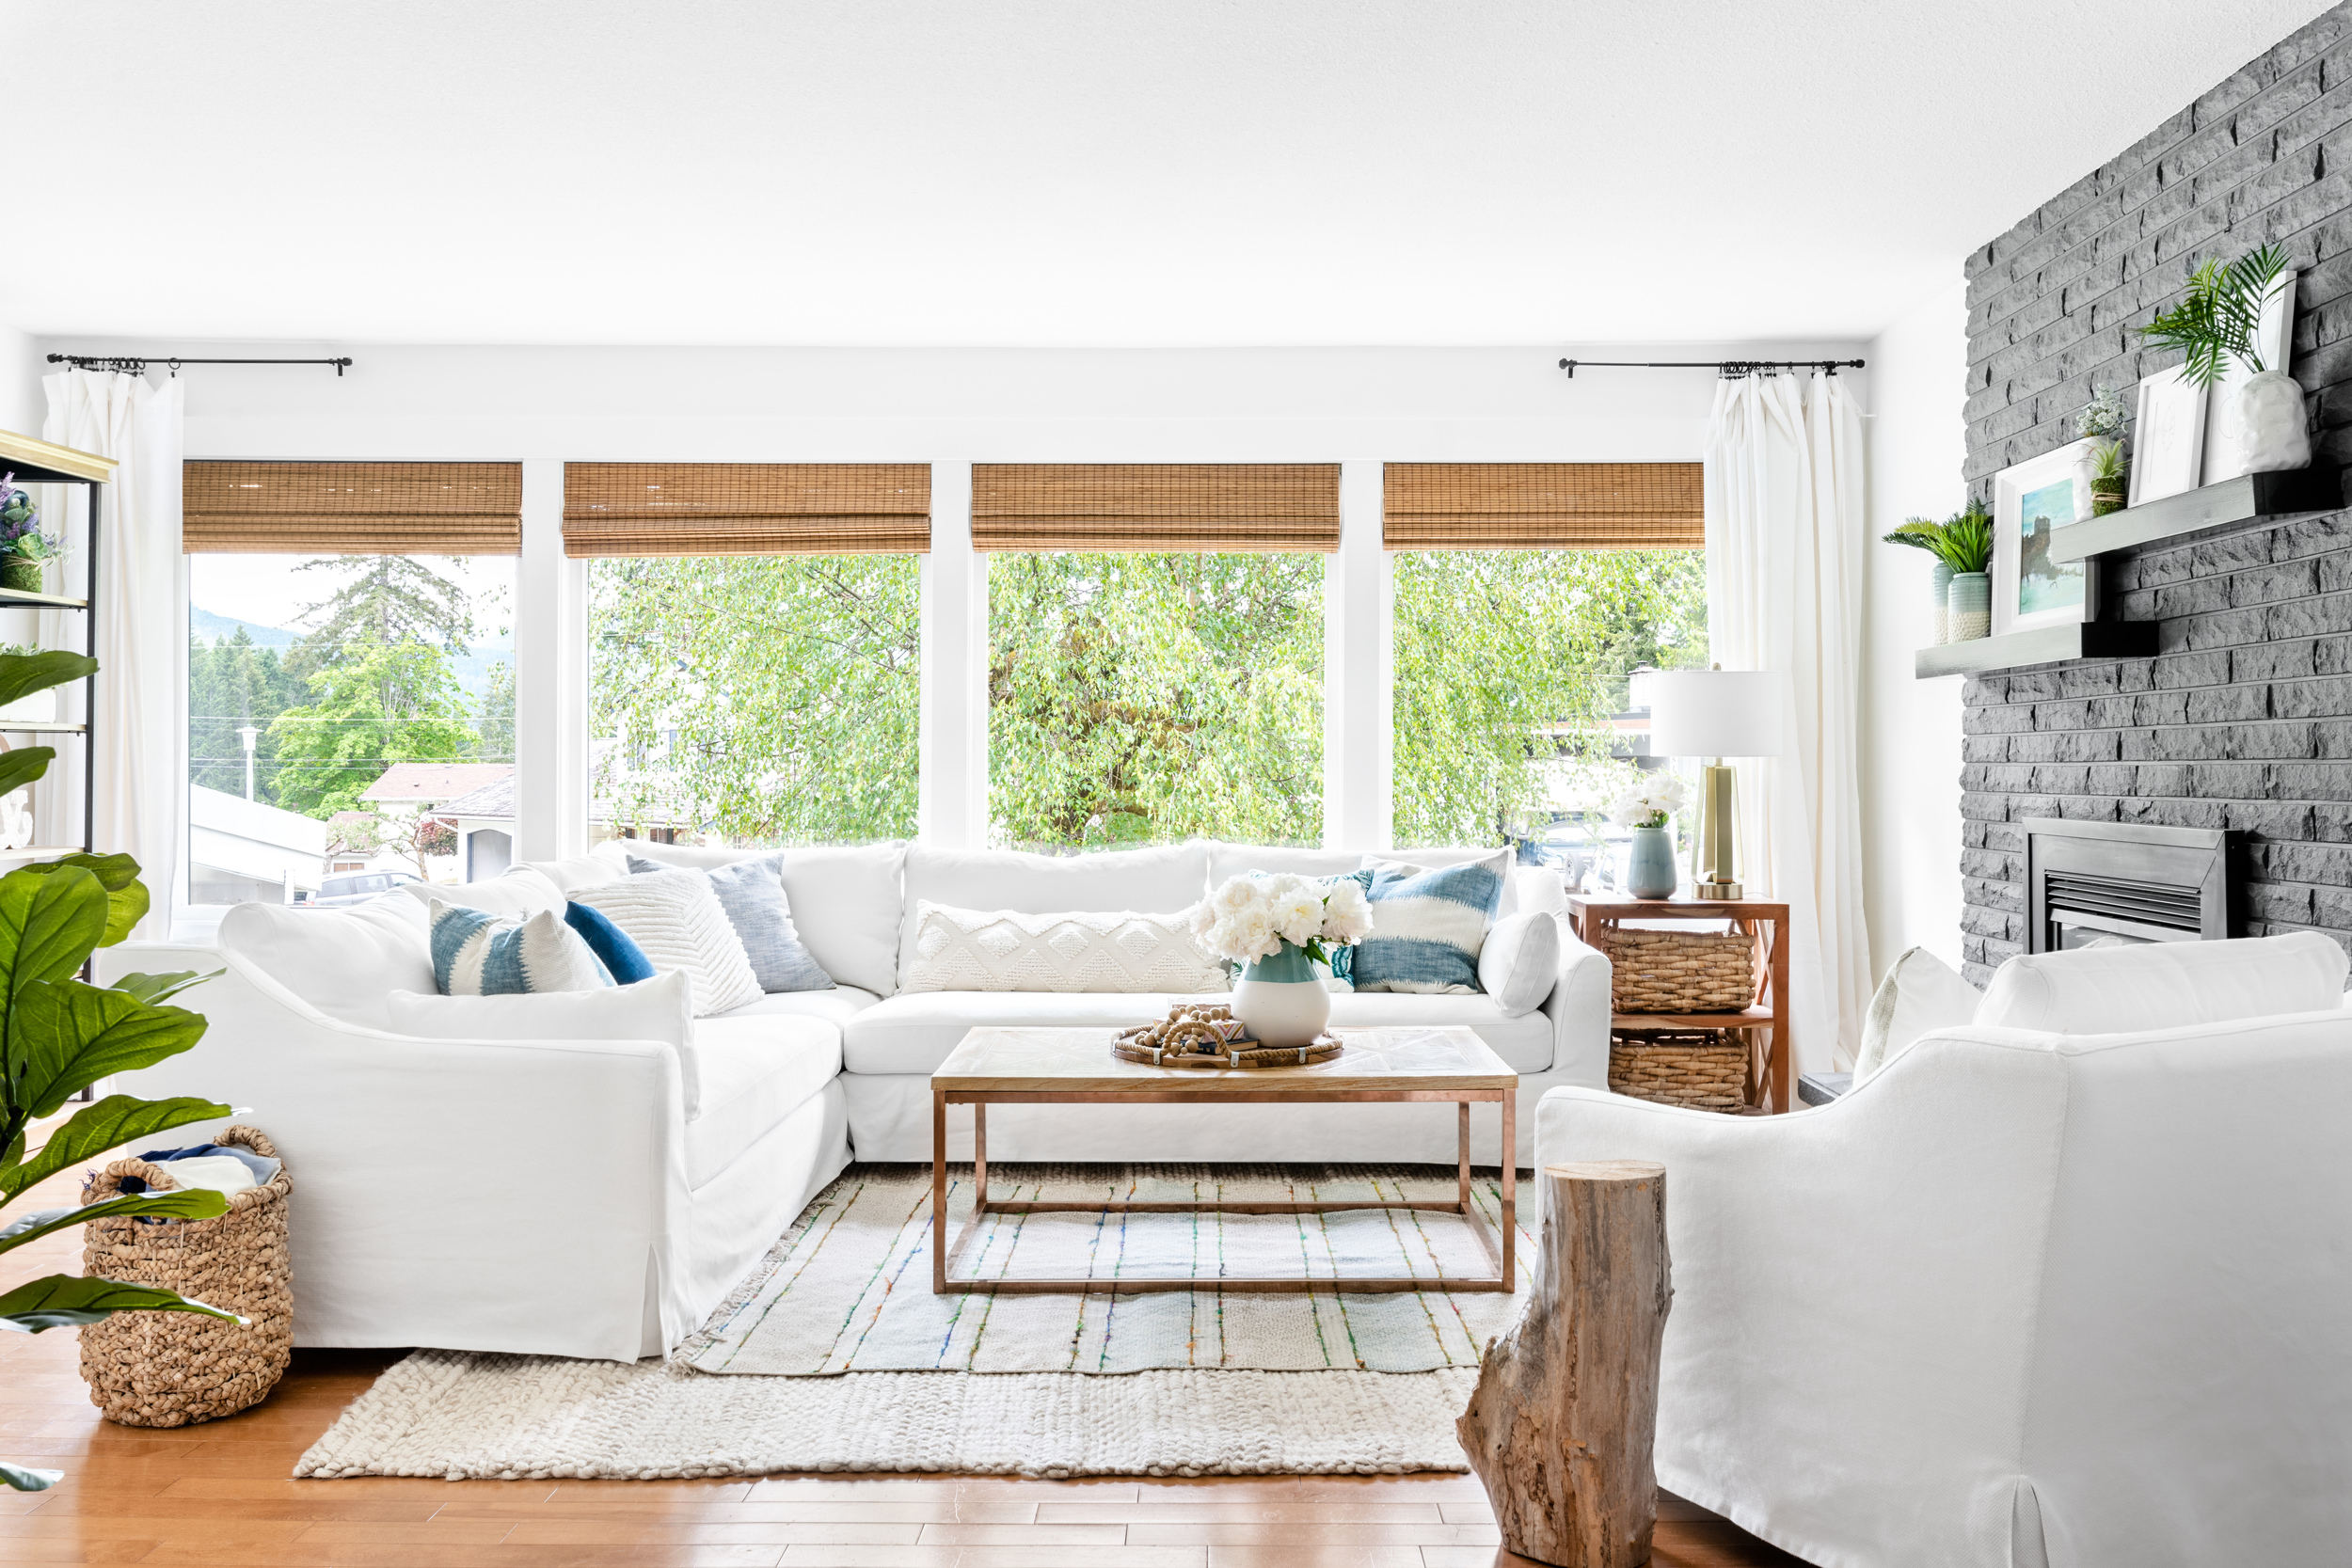 Light bright and airy living room with a white slipcovered sectional sofa and large windows with woven blinds